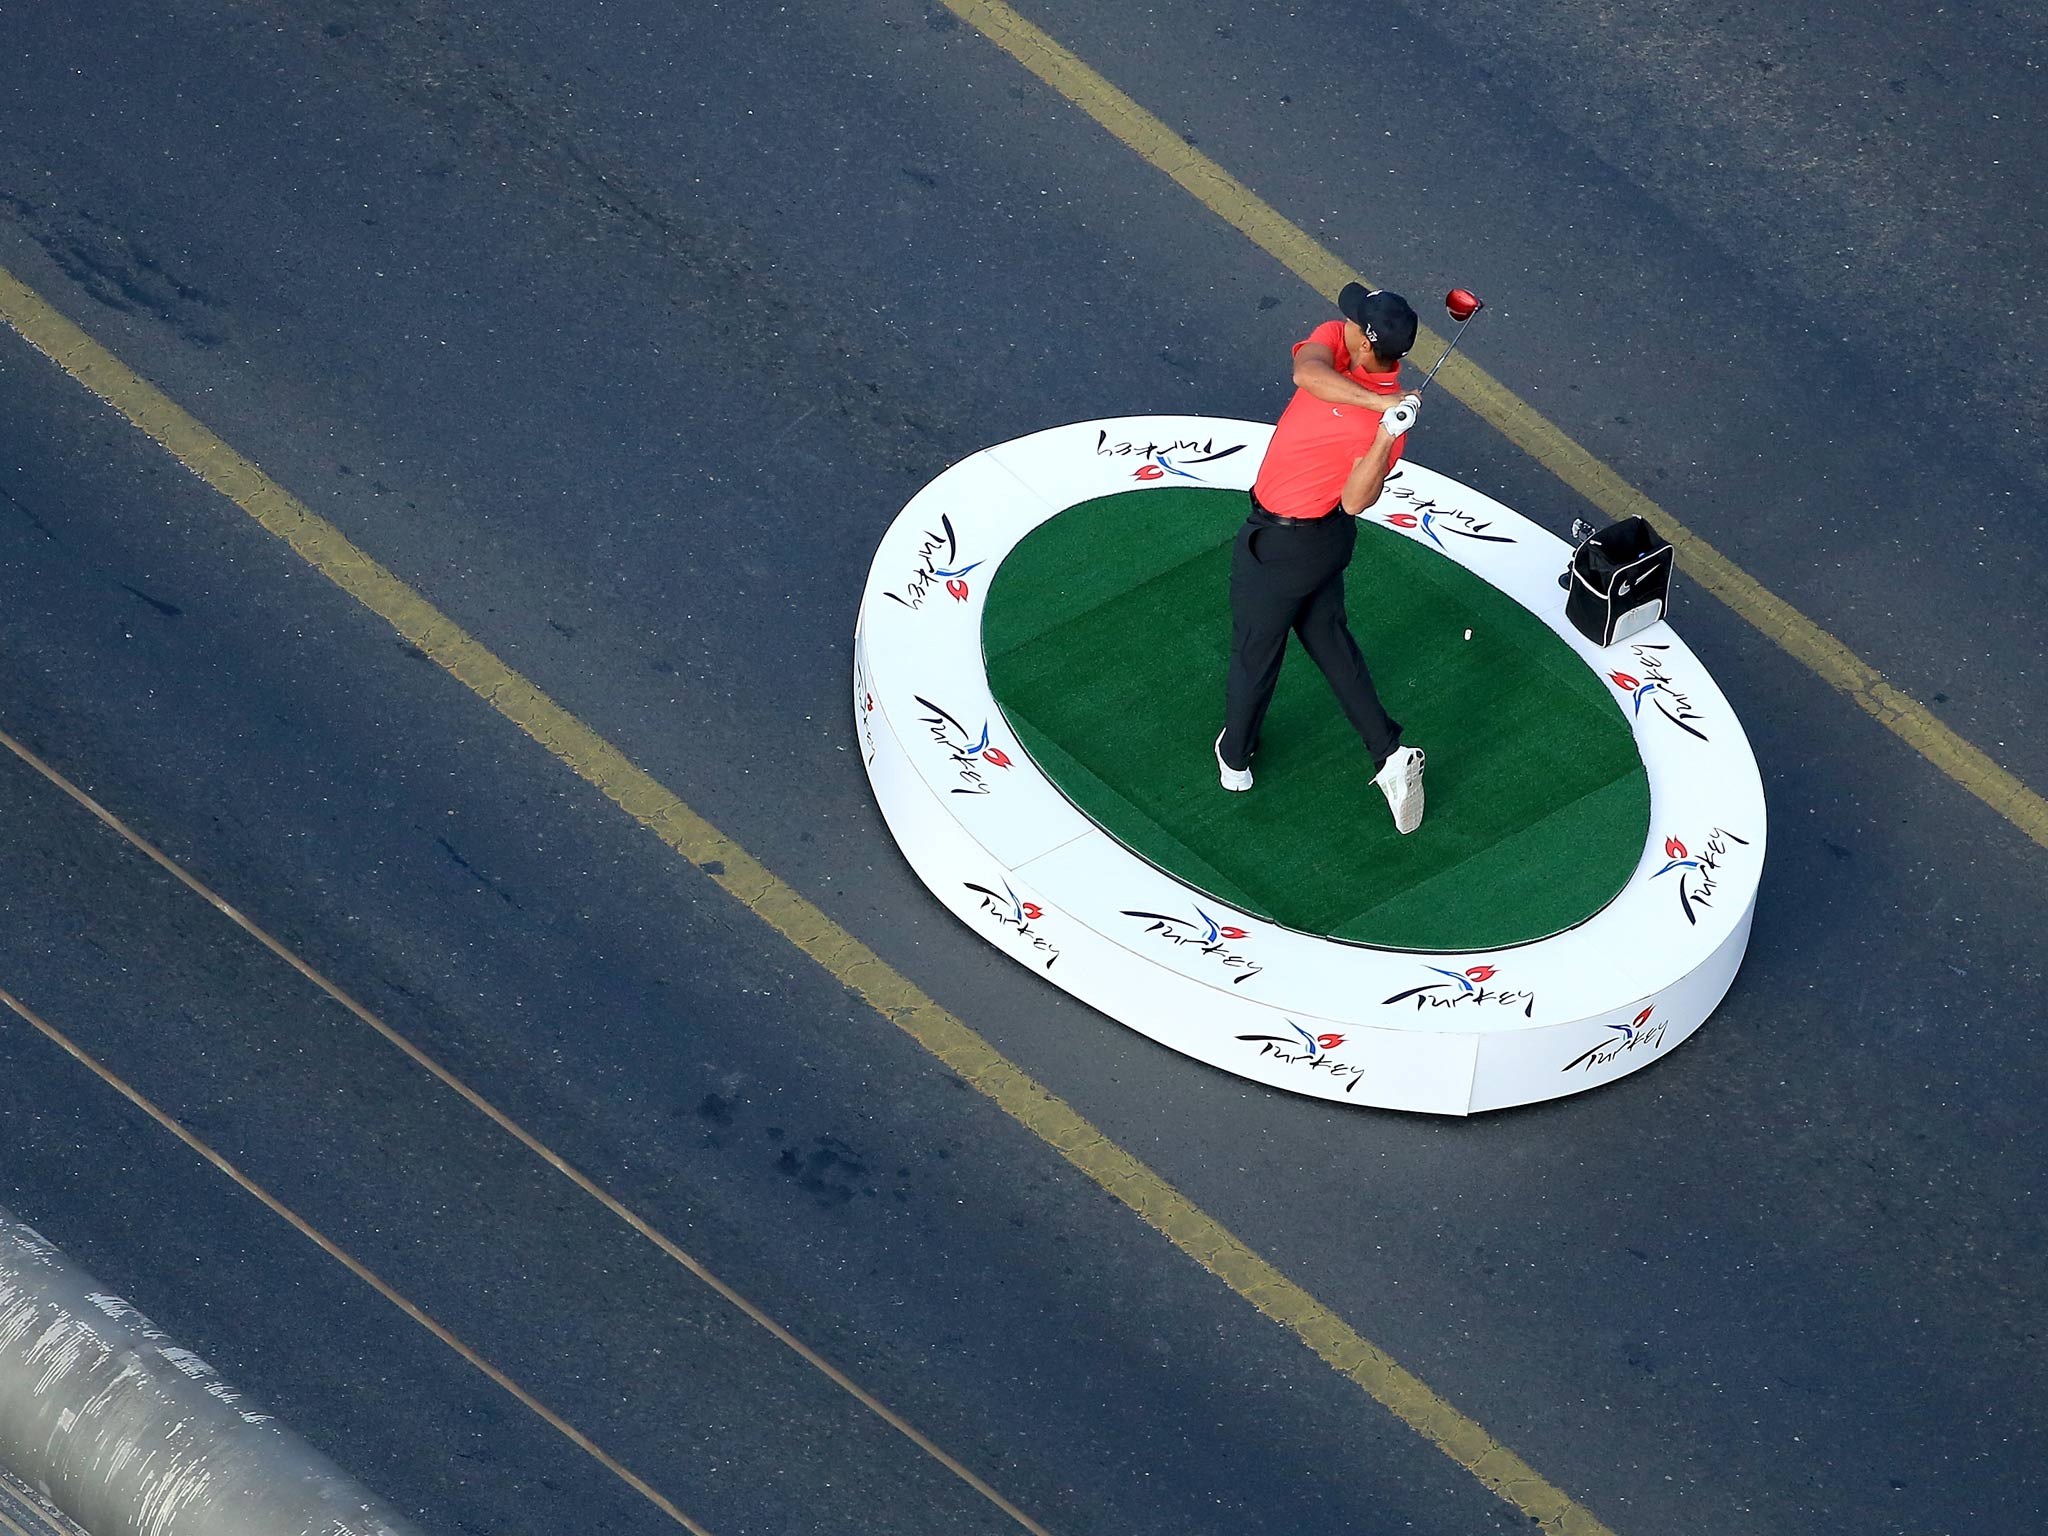 Tiger Woods makes history as he hits the first golf shots from East to West on Istanbul's iconic Bosphorus Bridge